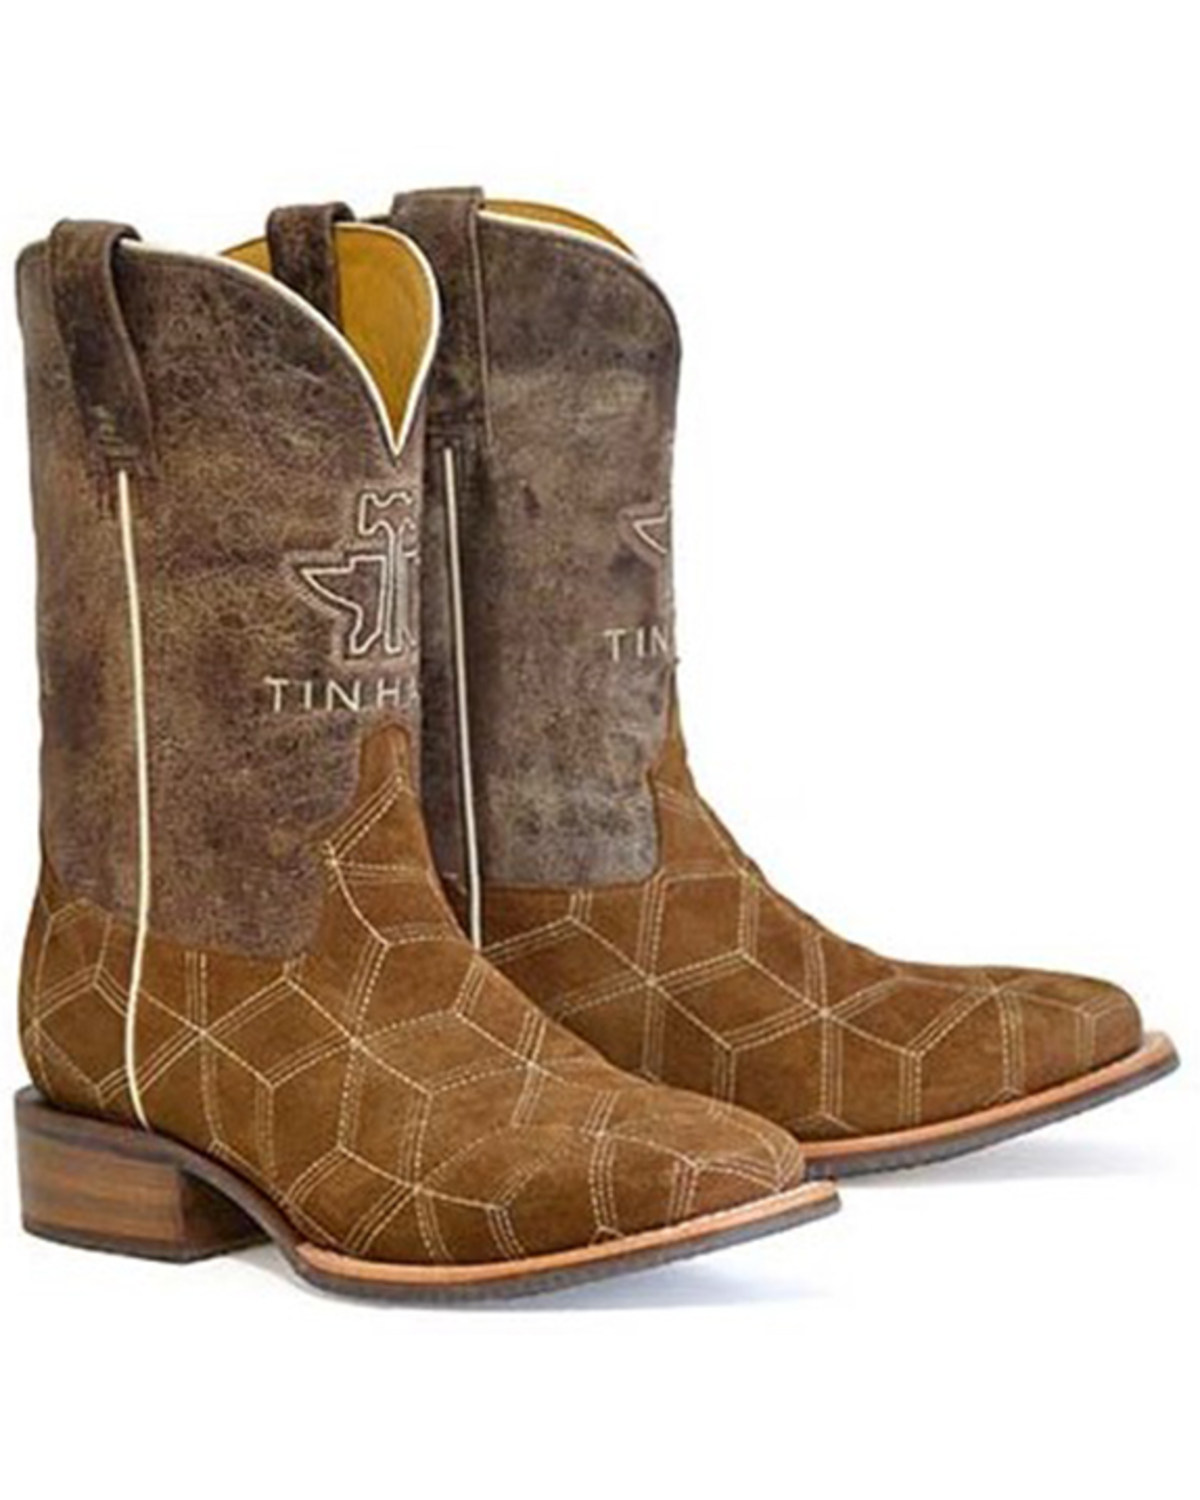 Tin Haul Men's Cubed Western Boots - Broad Square Toe